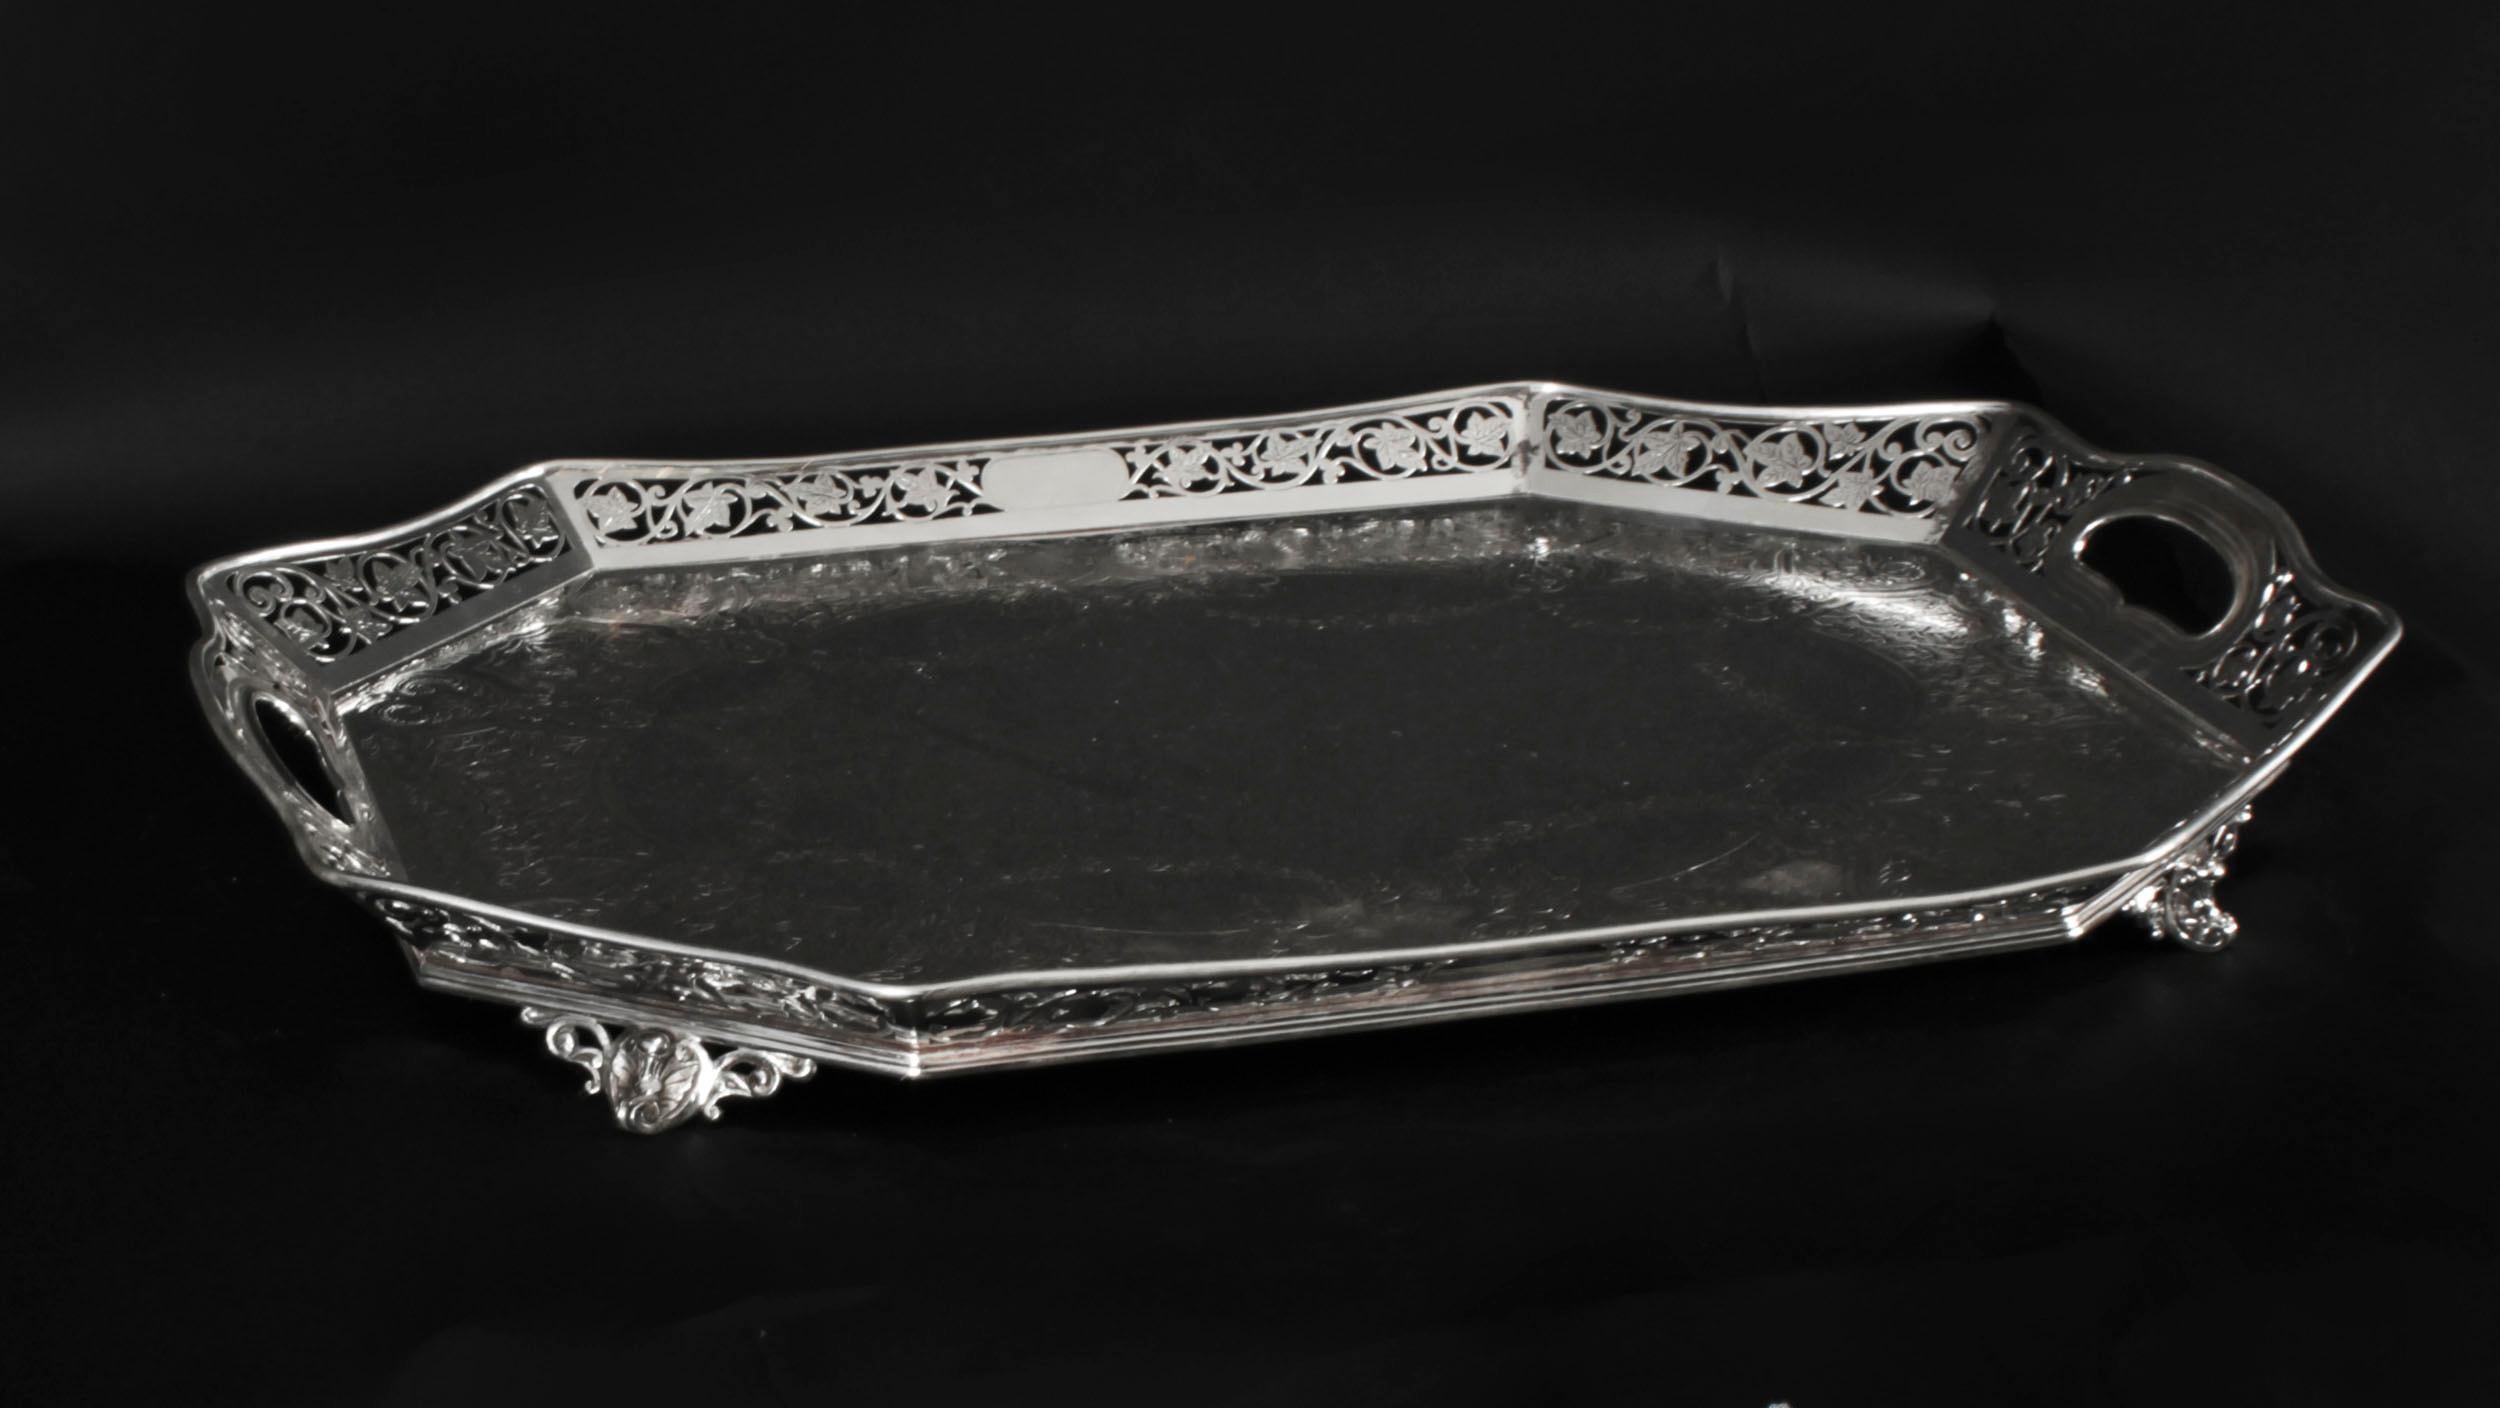 This is a lovely superb quality antique Victorian silver plated on copper gallery tray  bearing the makers mark of the renowned silversmith L&W for Lee & Wigfull, Sheffield, England, Circa 1880.
 
This shaped rectangular tray has cut off corners